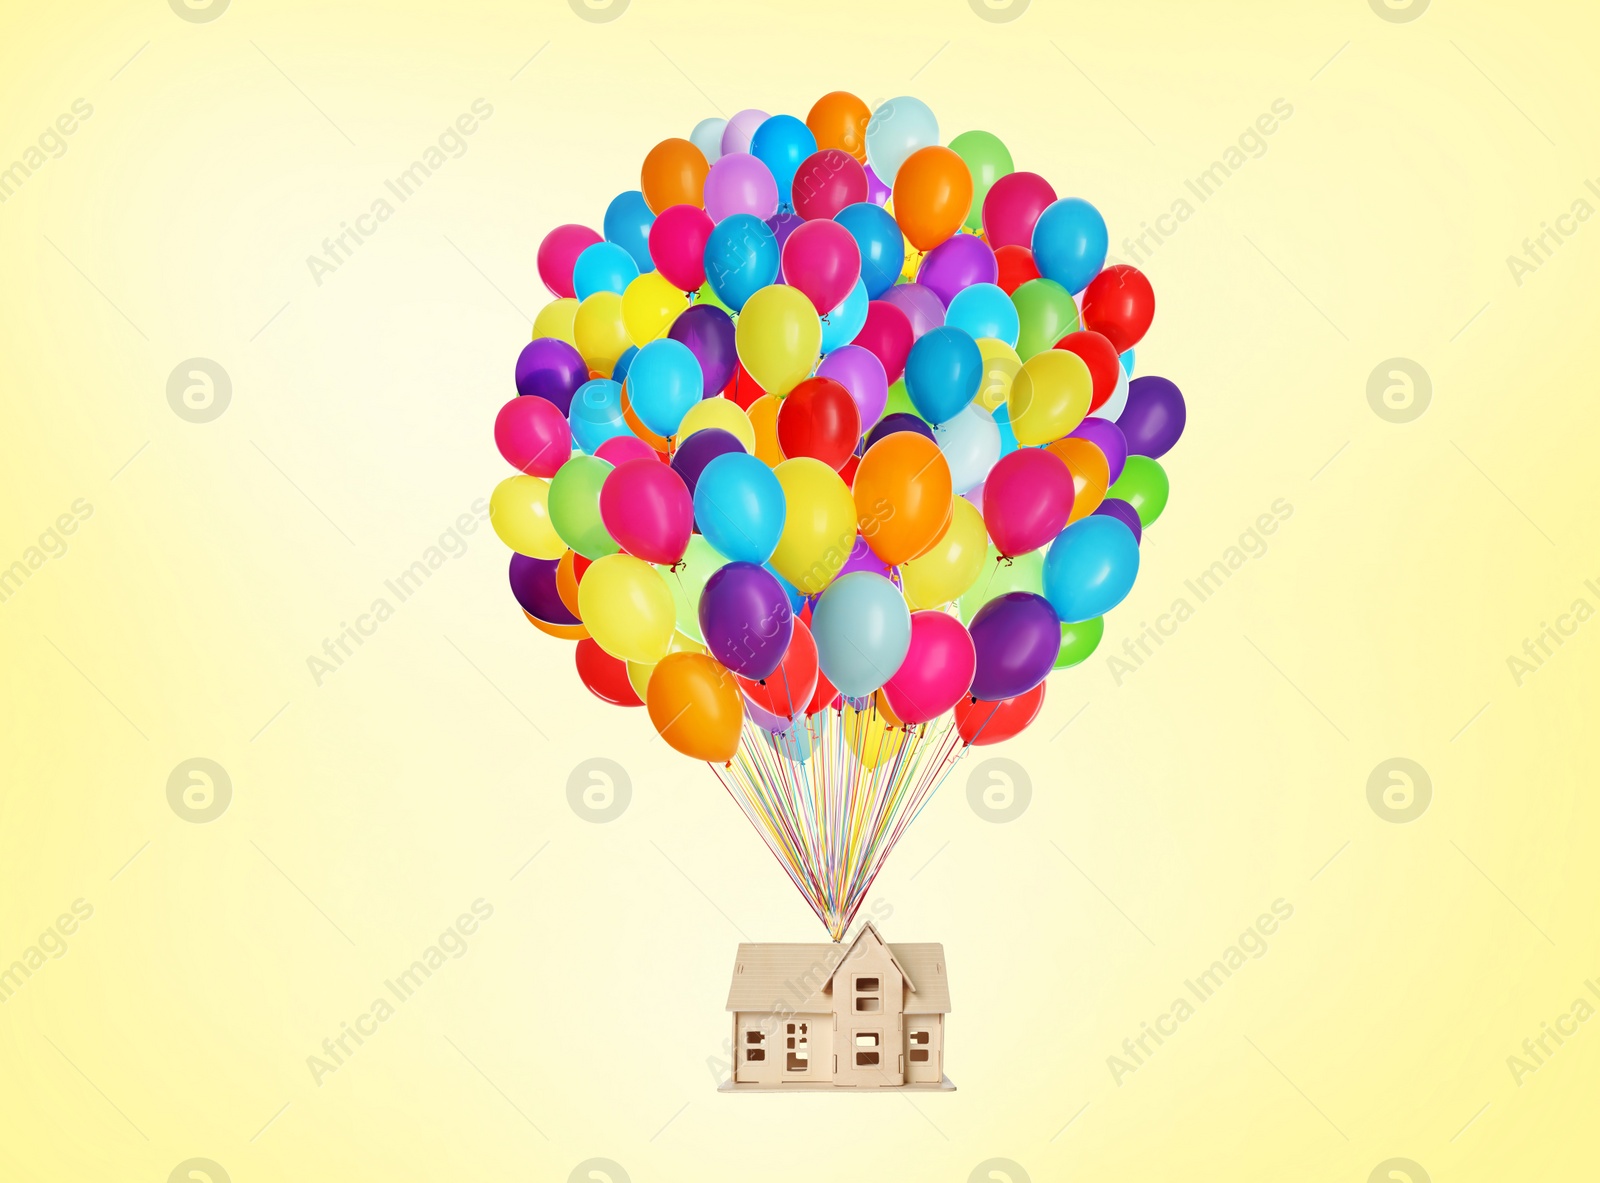 Image of Many balloons tied to model of house flying on yellow background